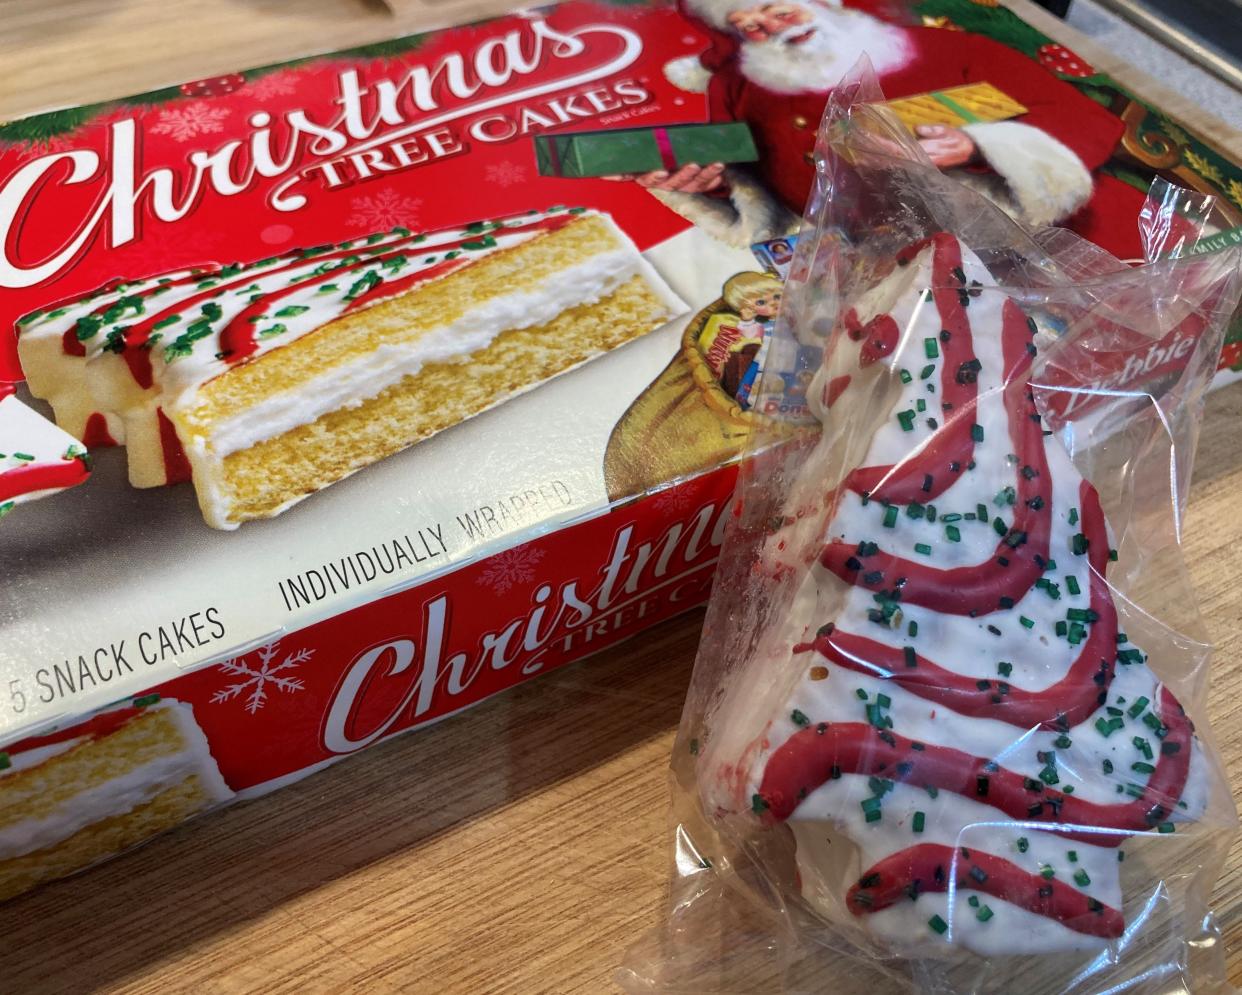 Little Debbie brand Christmas Tree Cakes are the inspirations for desserts in the Wilmington area. ALLISON BALLARD/STARNEWS